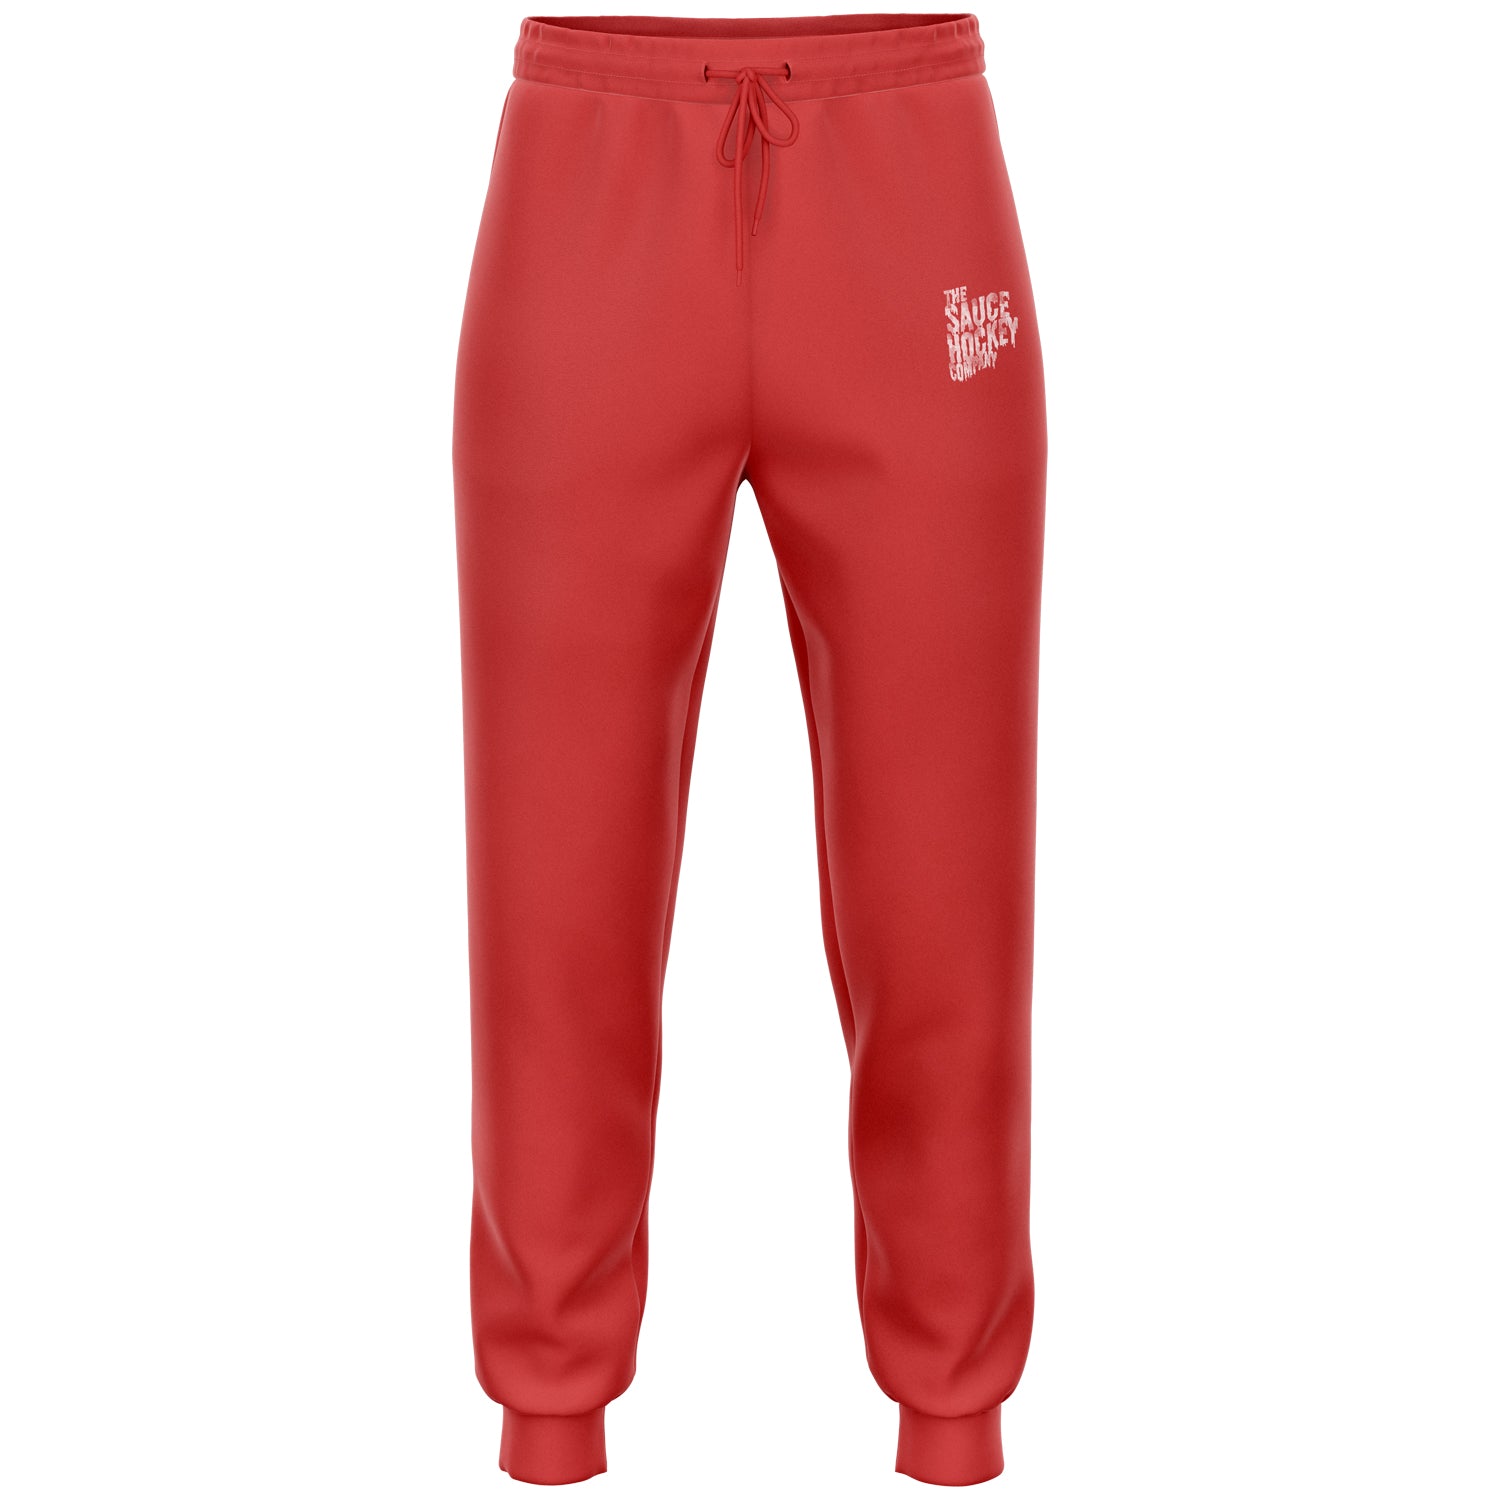 HEALTHY SCRATCH 2.0 JOGGERS - RED